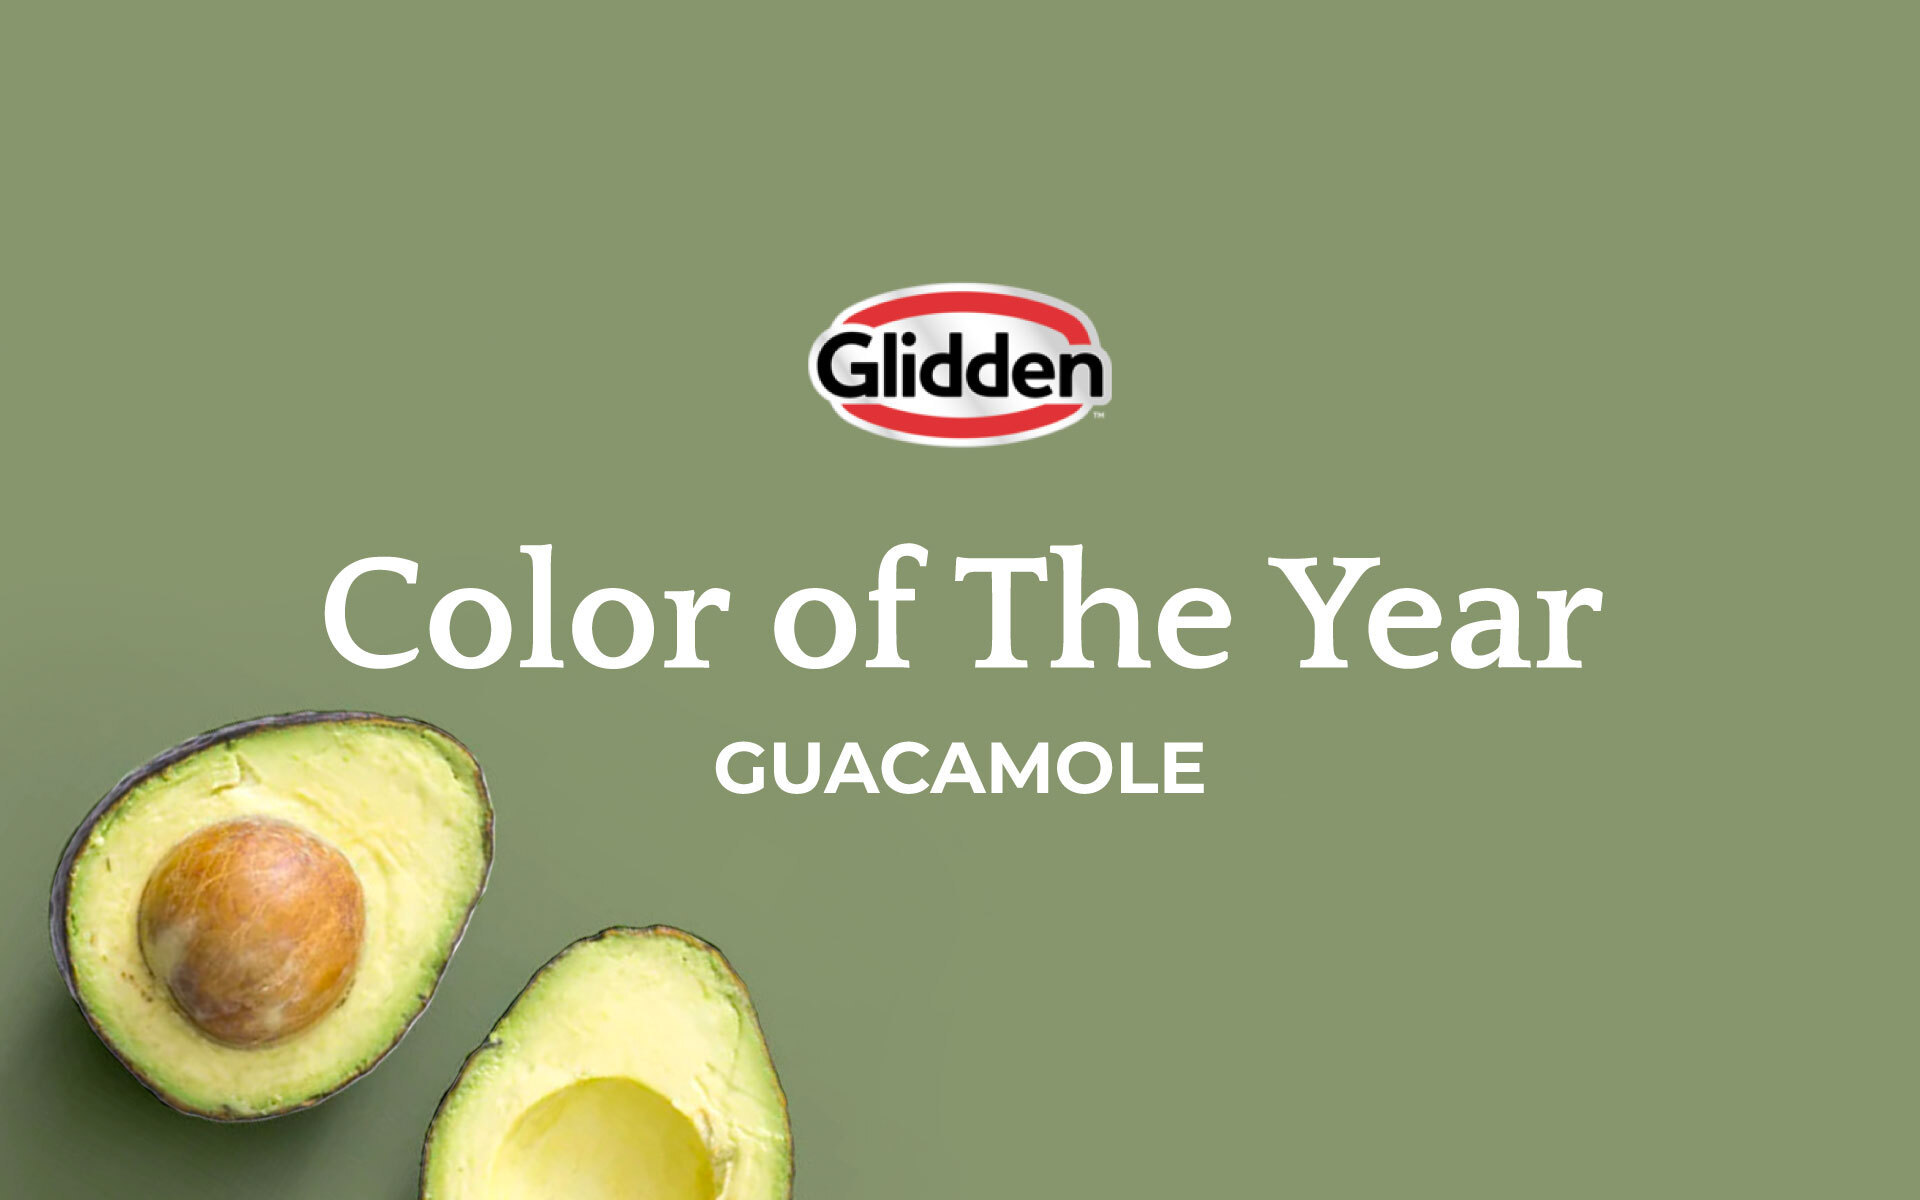 Glidden Color of the Year 2022